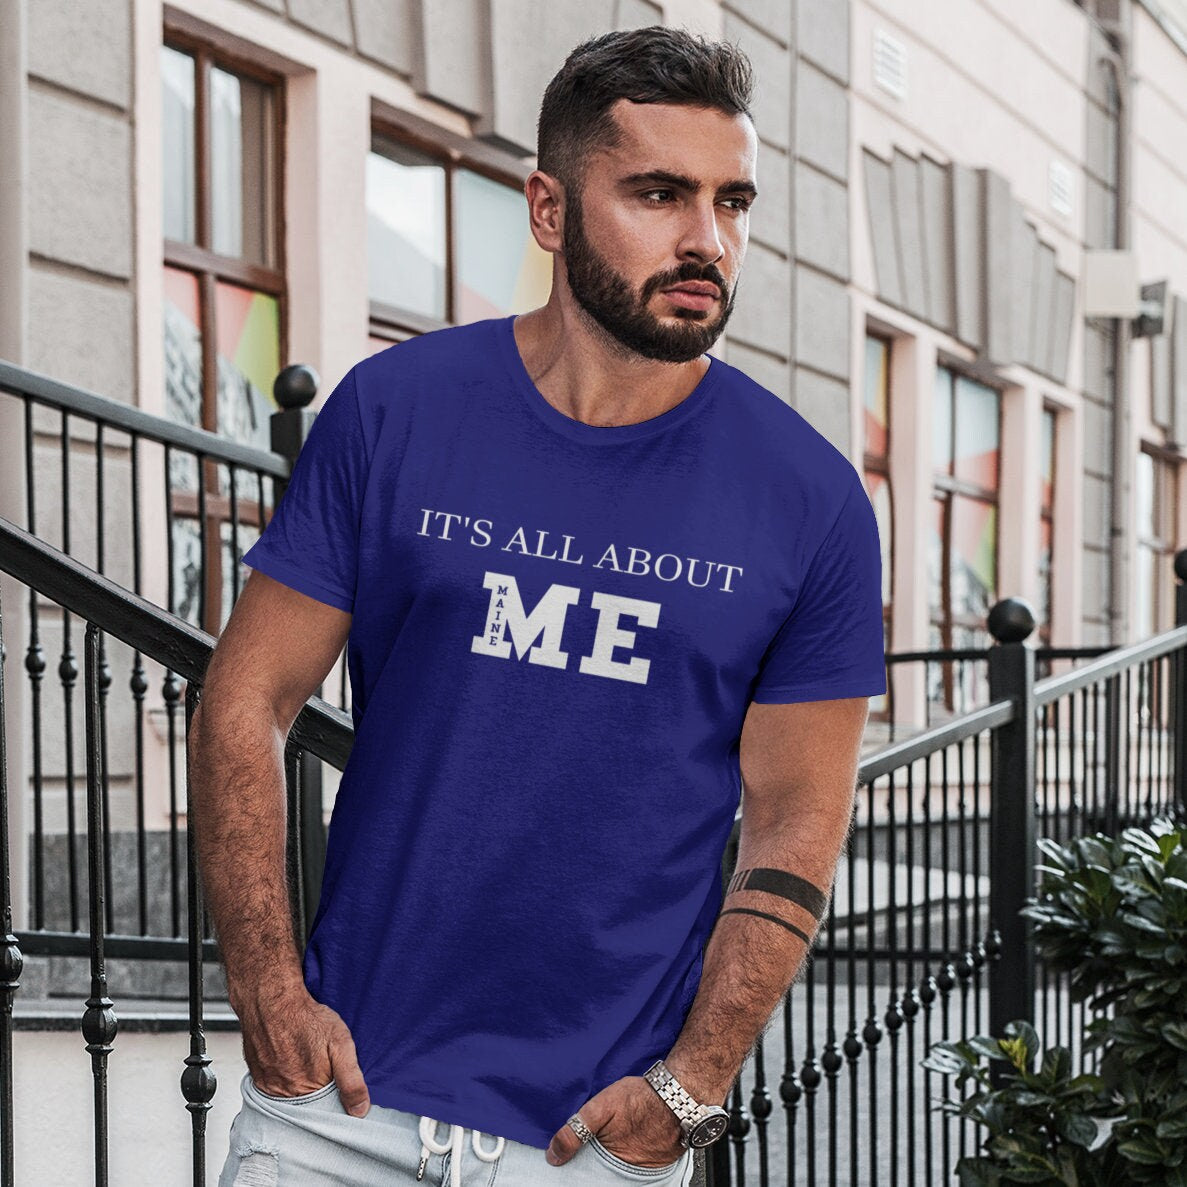 It's All About ME (Maine) short sleeved t-shirt - Team Navy Blue